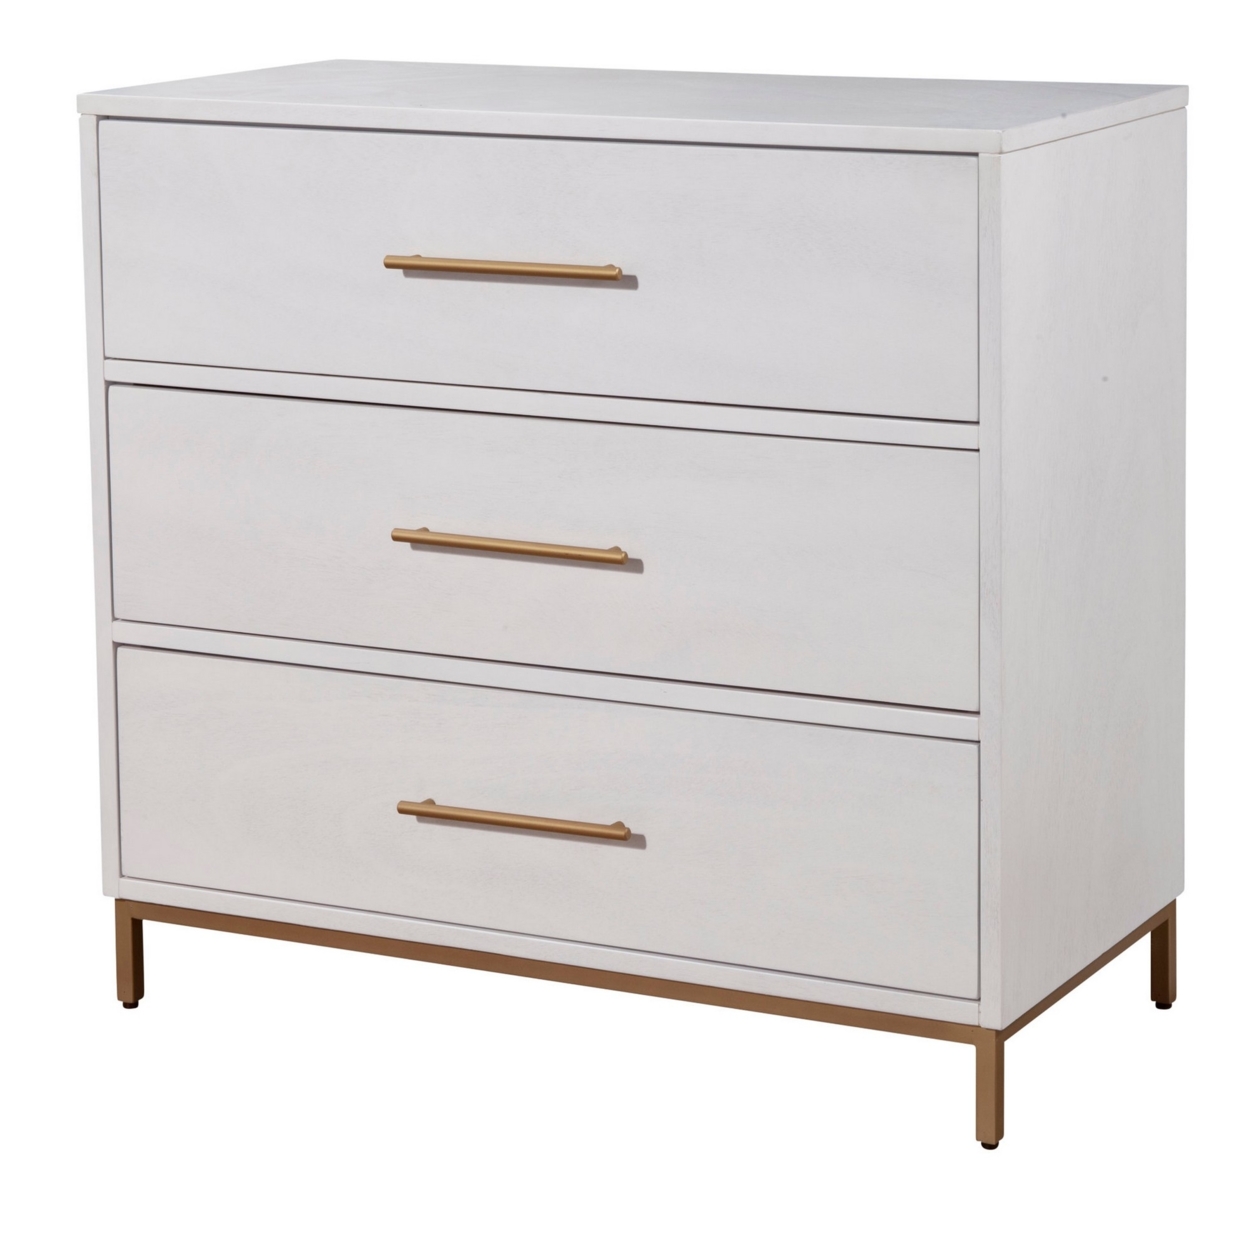 34 Inch 3 Drawer Wooden Chest With Metal Base, Small, White- Saltoro Sherpi